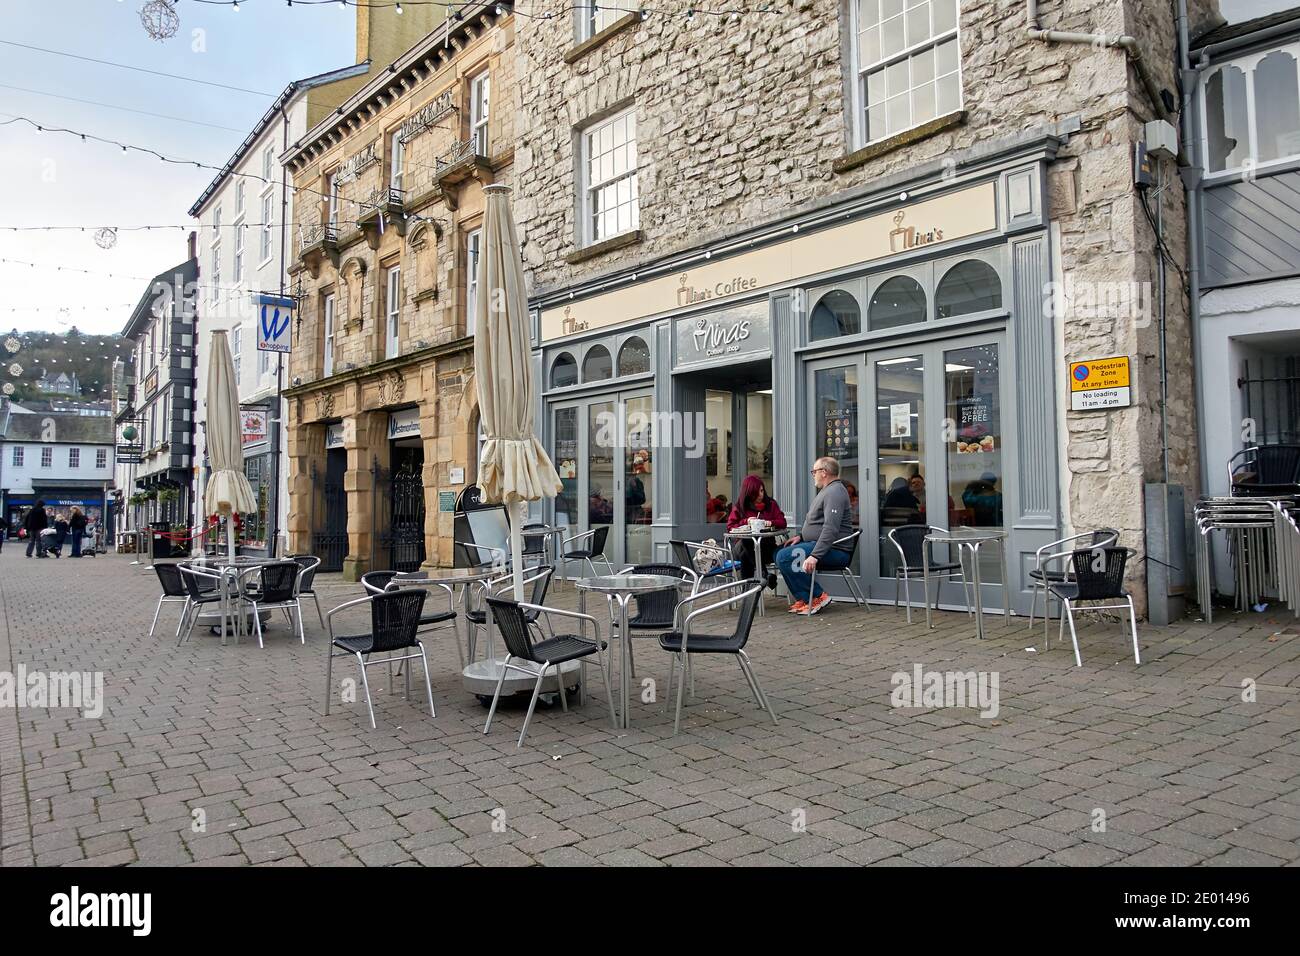 A quiet street cafe in a marketplace on Christmas Eve with few shoppers about due to the Covid 19 pandemic Stock Photo